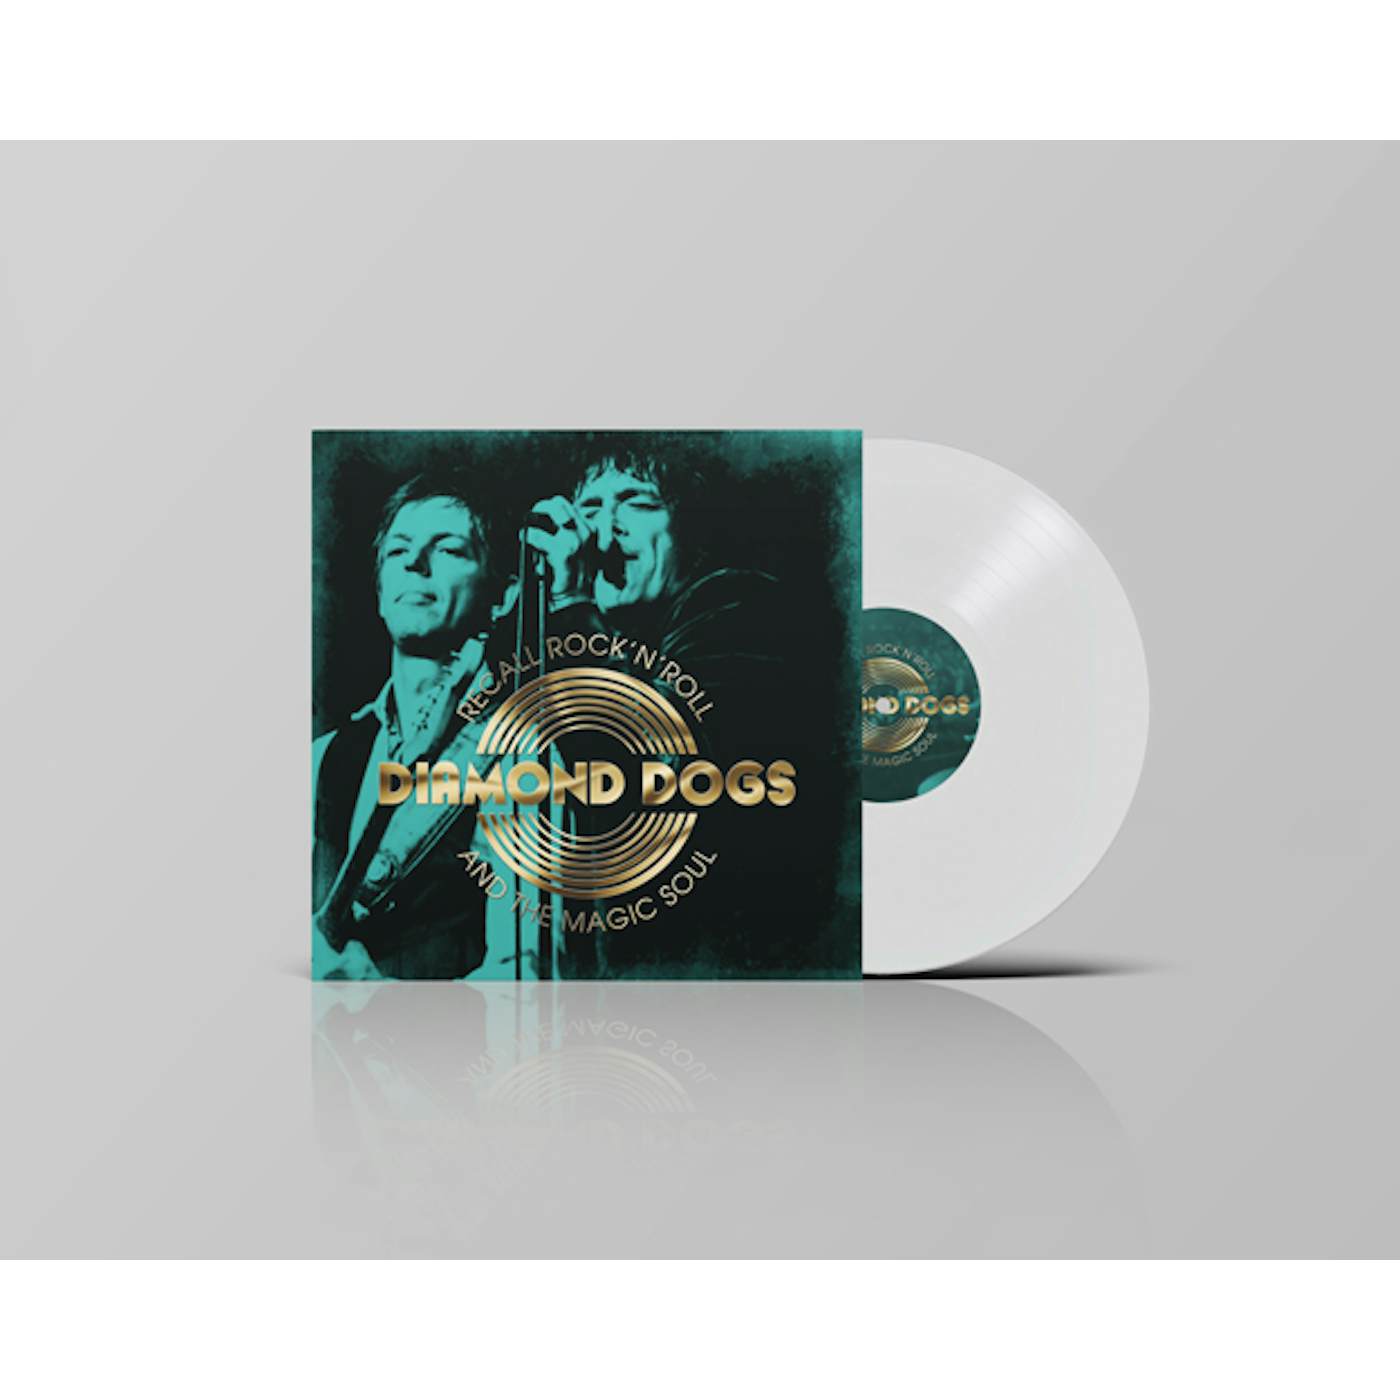 Diamond Dogs RECALL ROCK N ROLL AND THE MAGIC SOUL Vinyl Record